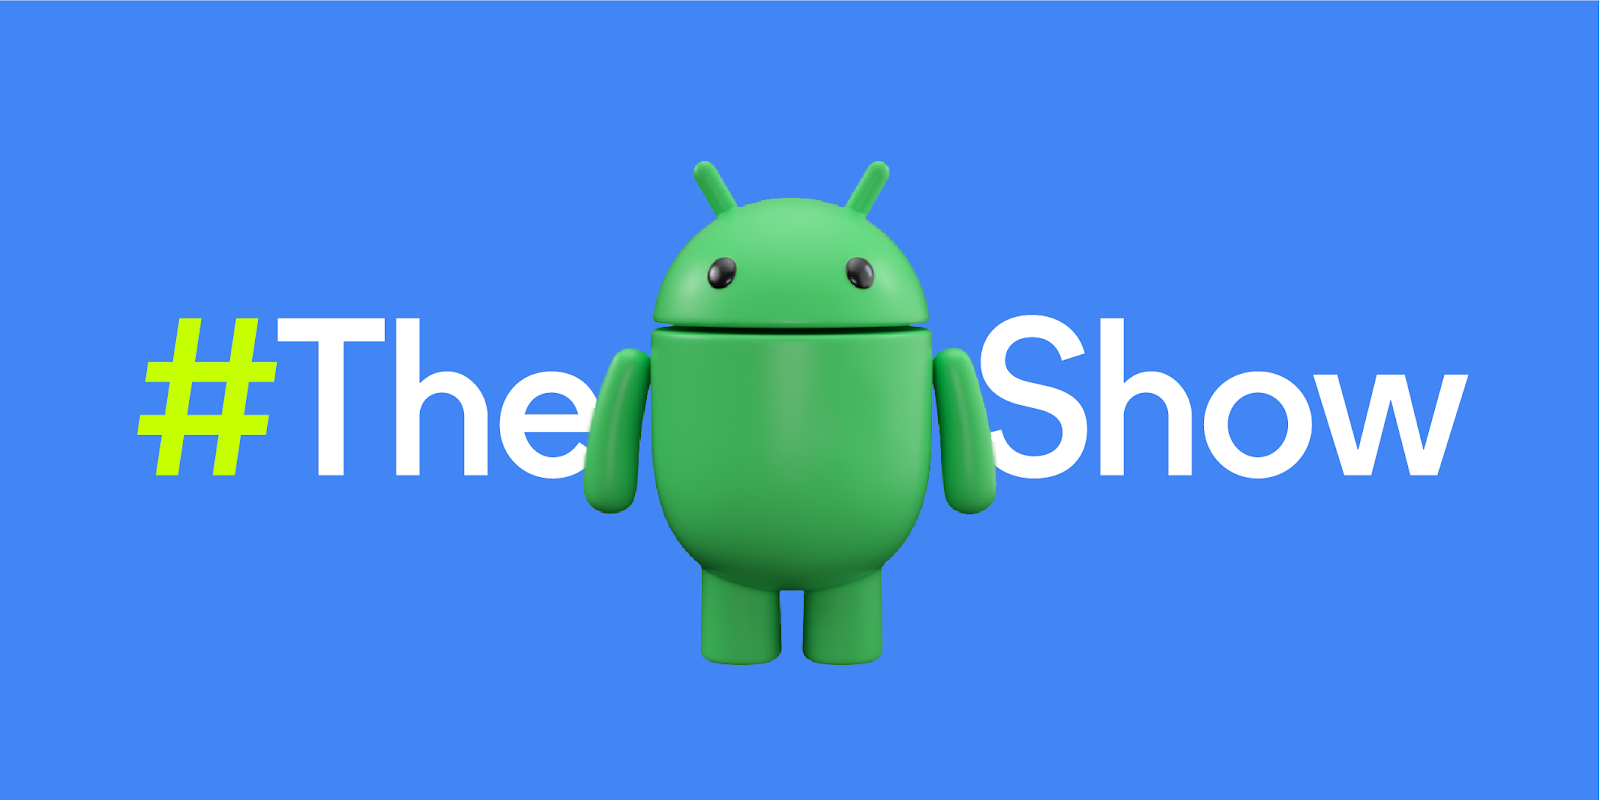 #TheAndroidShow: Faster and easier to build excellent apps, across devices. 